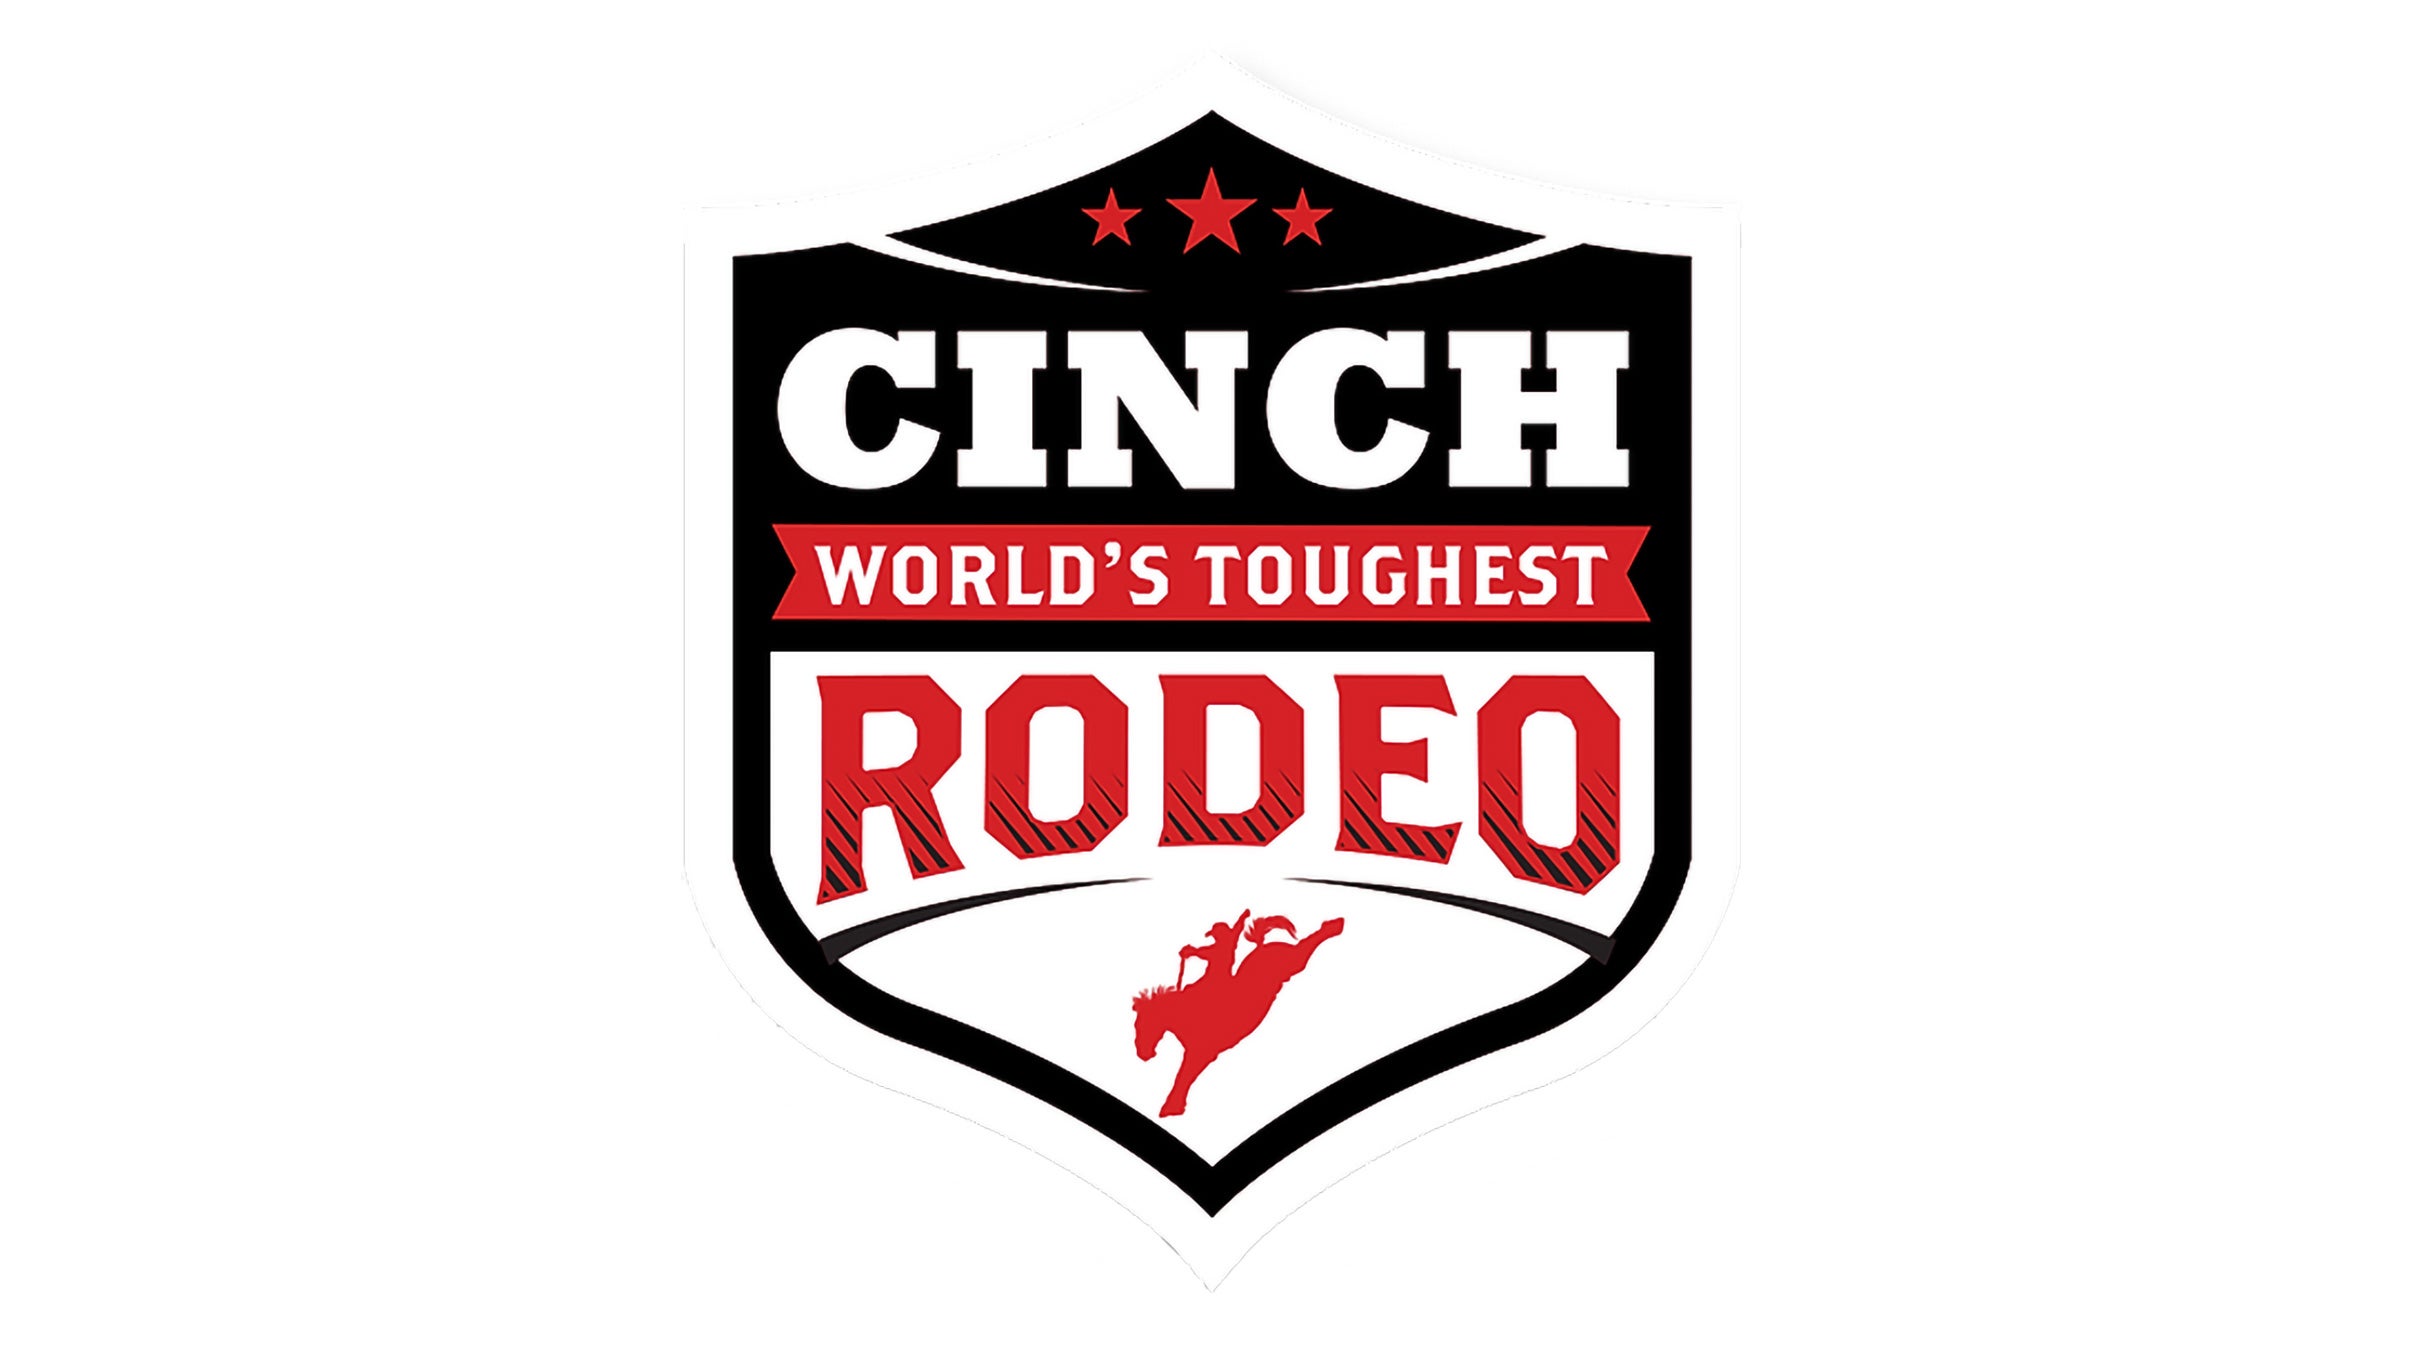 members only presale code for Cinch World's Toughest Rodeo advanced tickets in Saint Paul